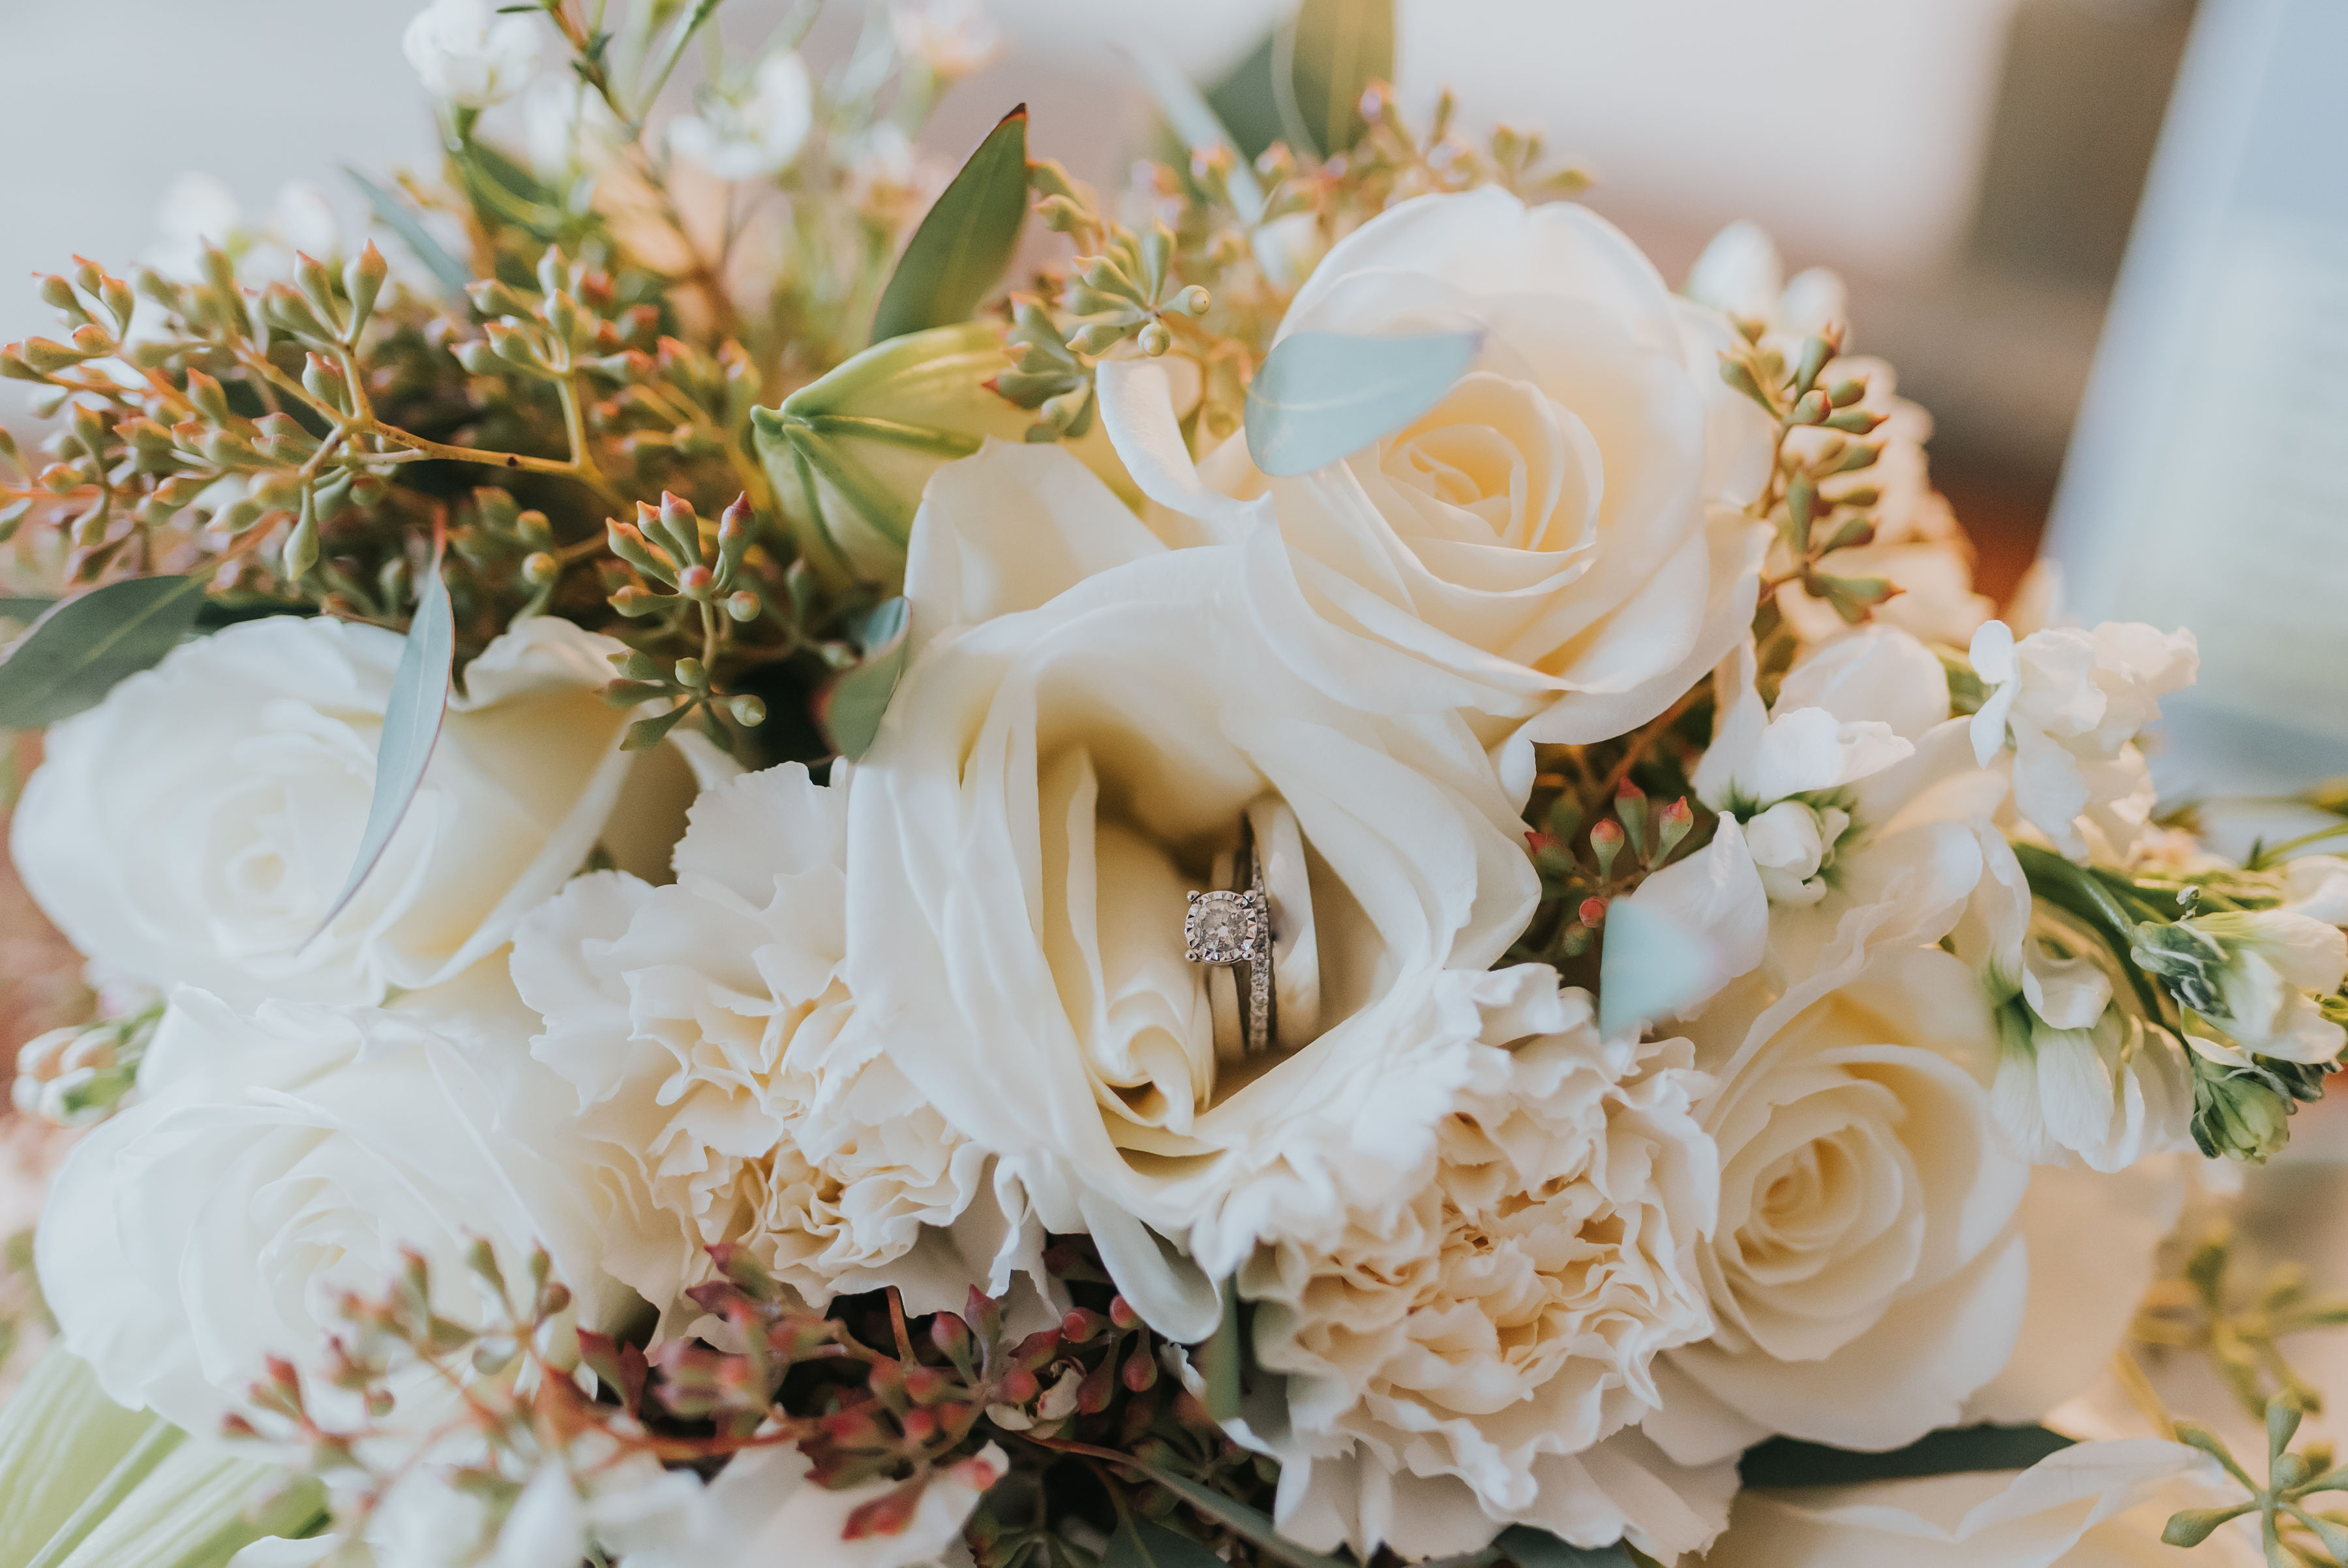 Bouquet of white roses with two wedding rings